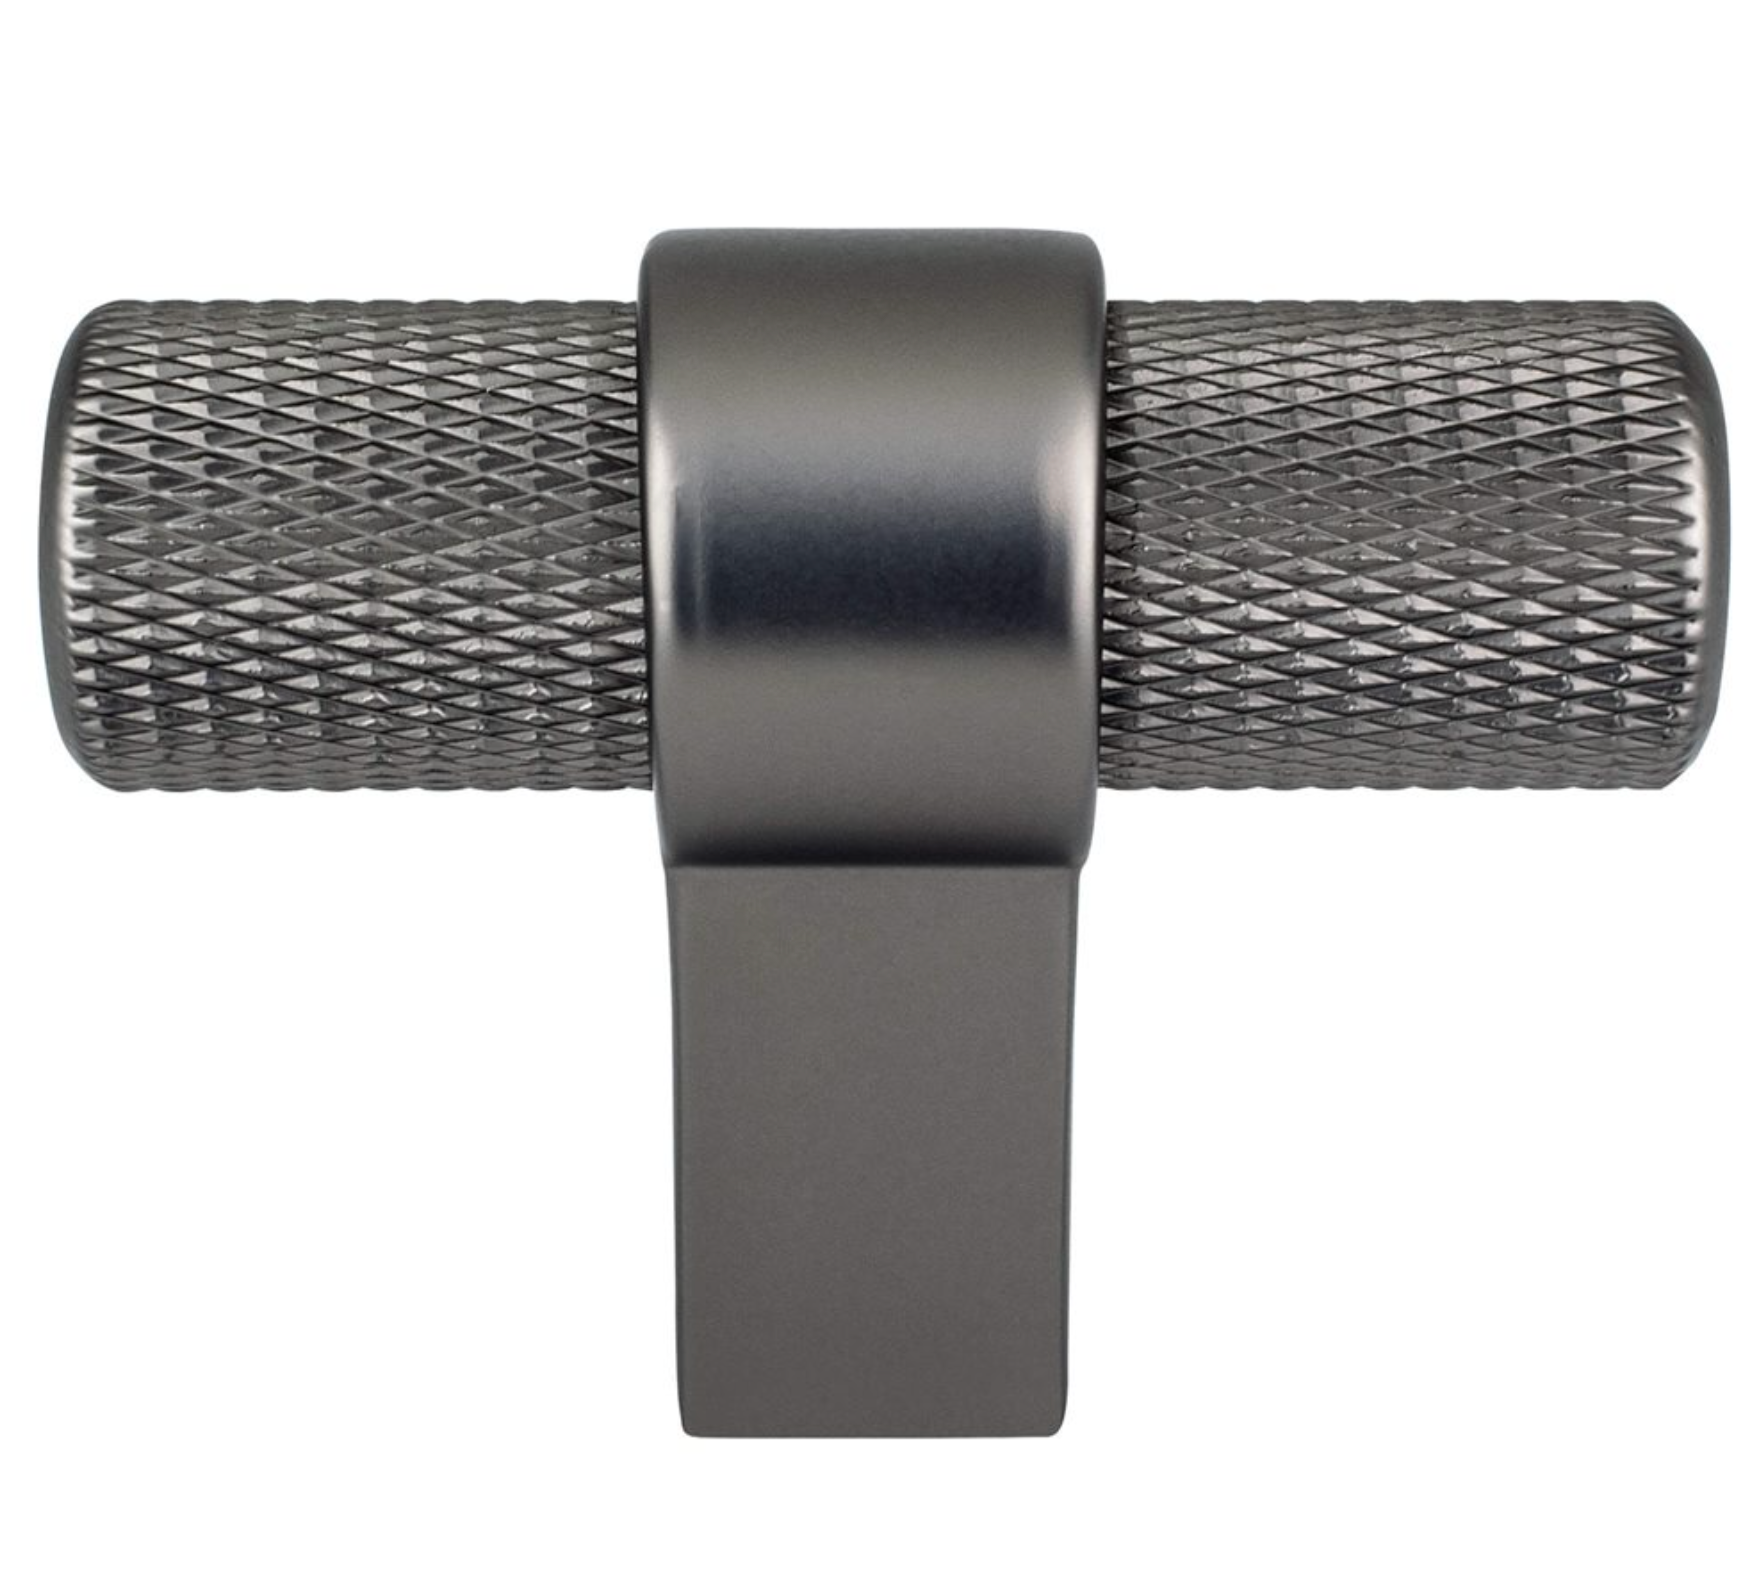 Knurled "Prelude" Ash Gray Cabinet Knobs and Drawer Pulls - Industry Hardware